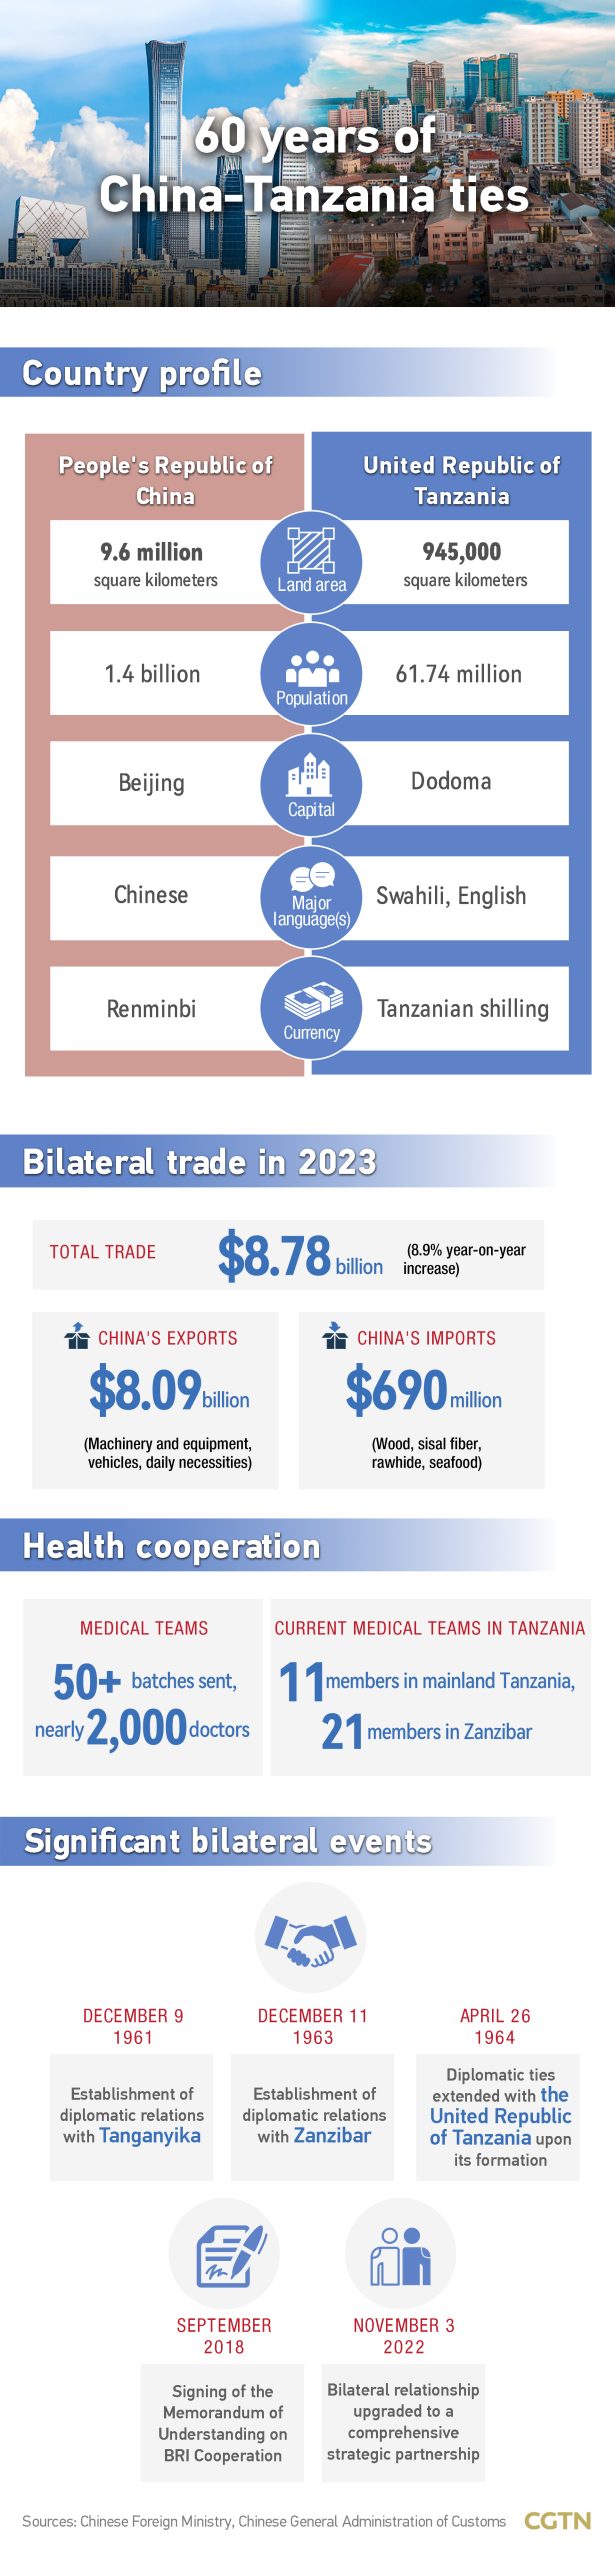 Chart of the Day: China, Tanzania celebrate 60 years of diplomatic ties